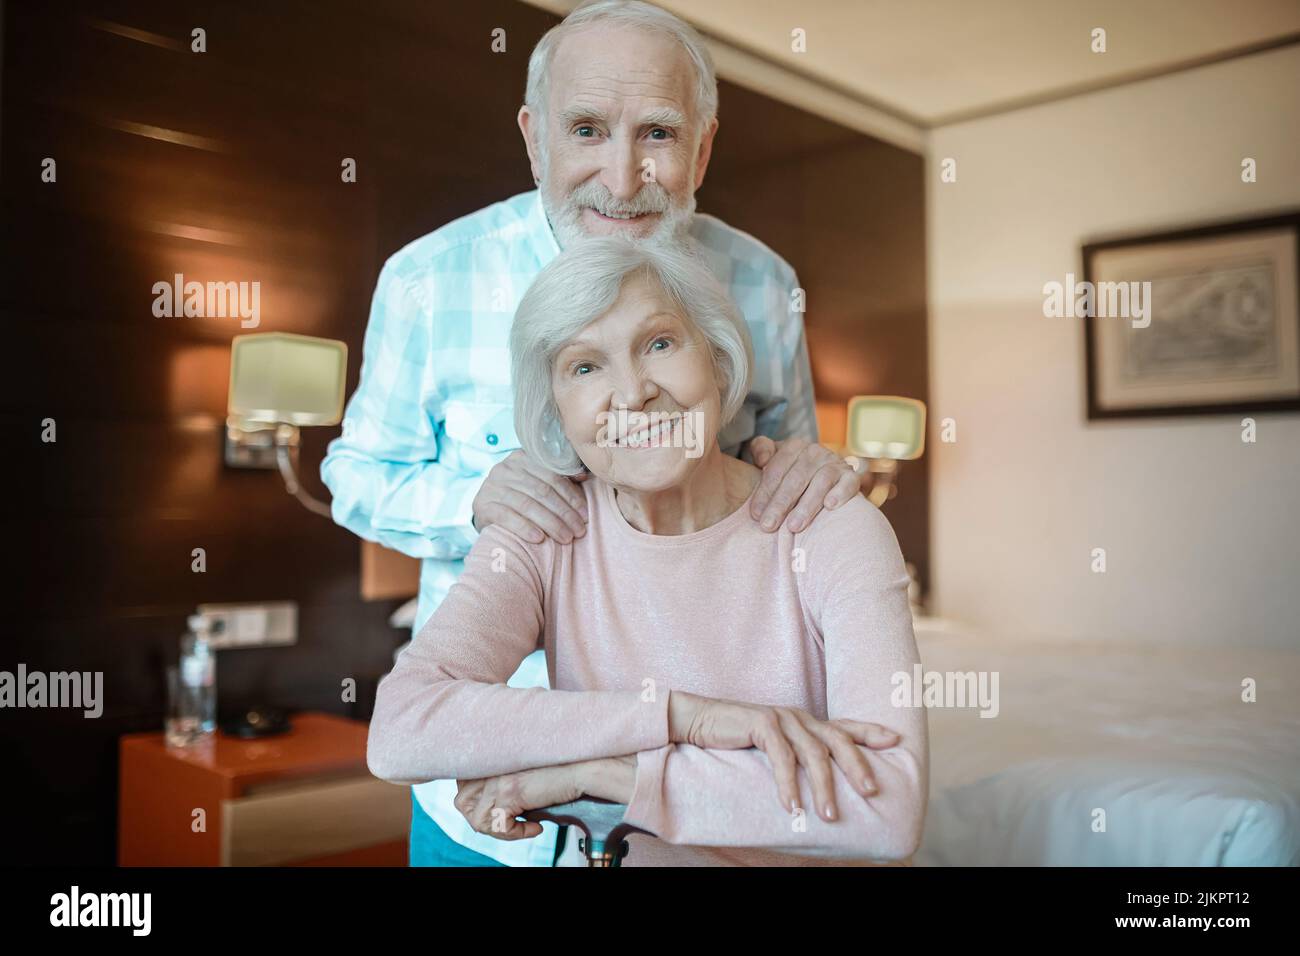 Two senior people smiling and looking happy together Stock Photo